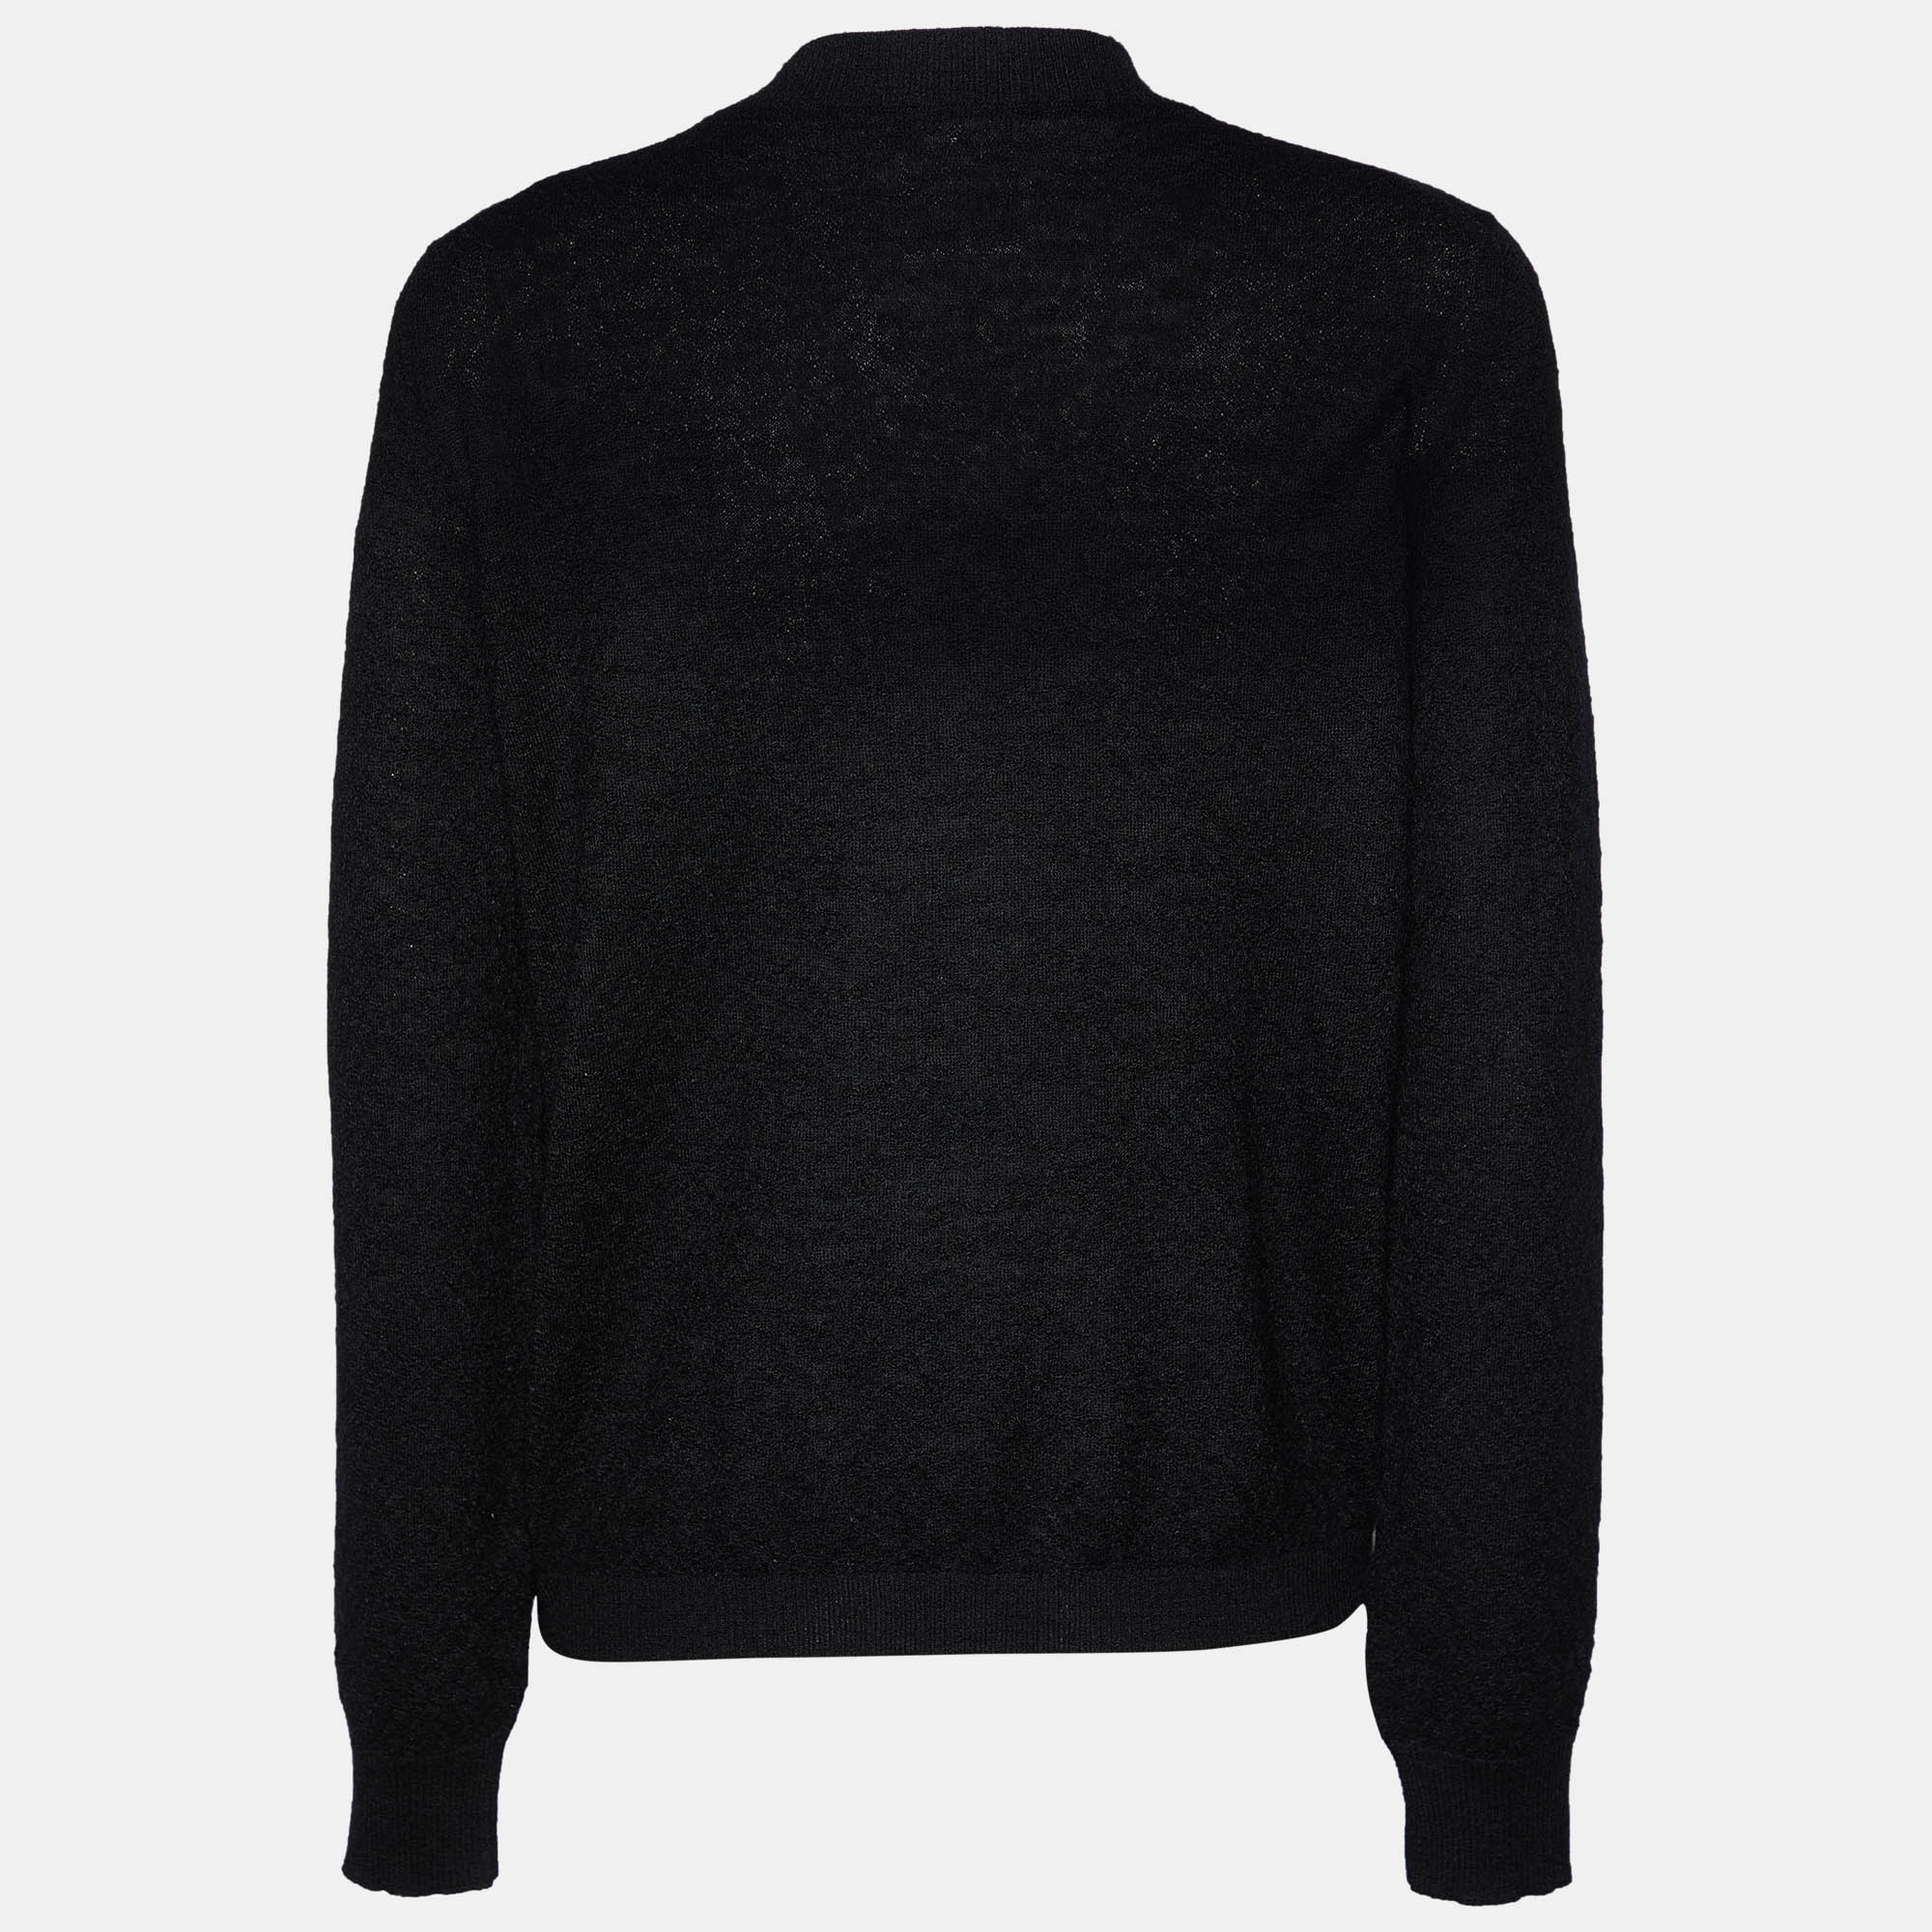 

Chanel Black Pearl Embellished Mohair & Cashmere Cardigan